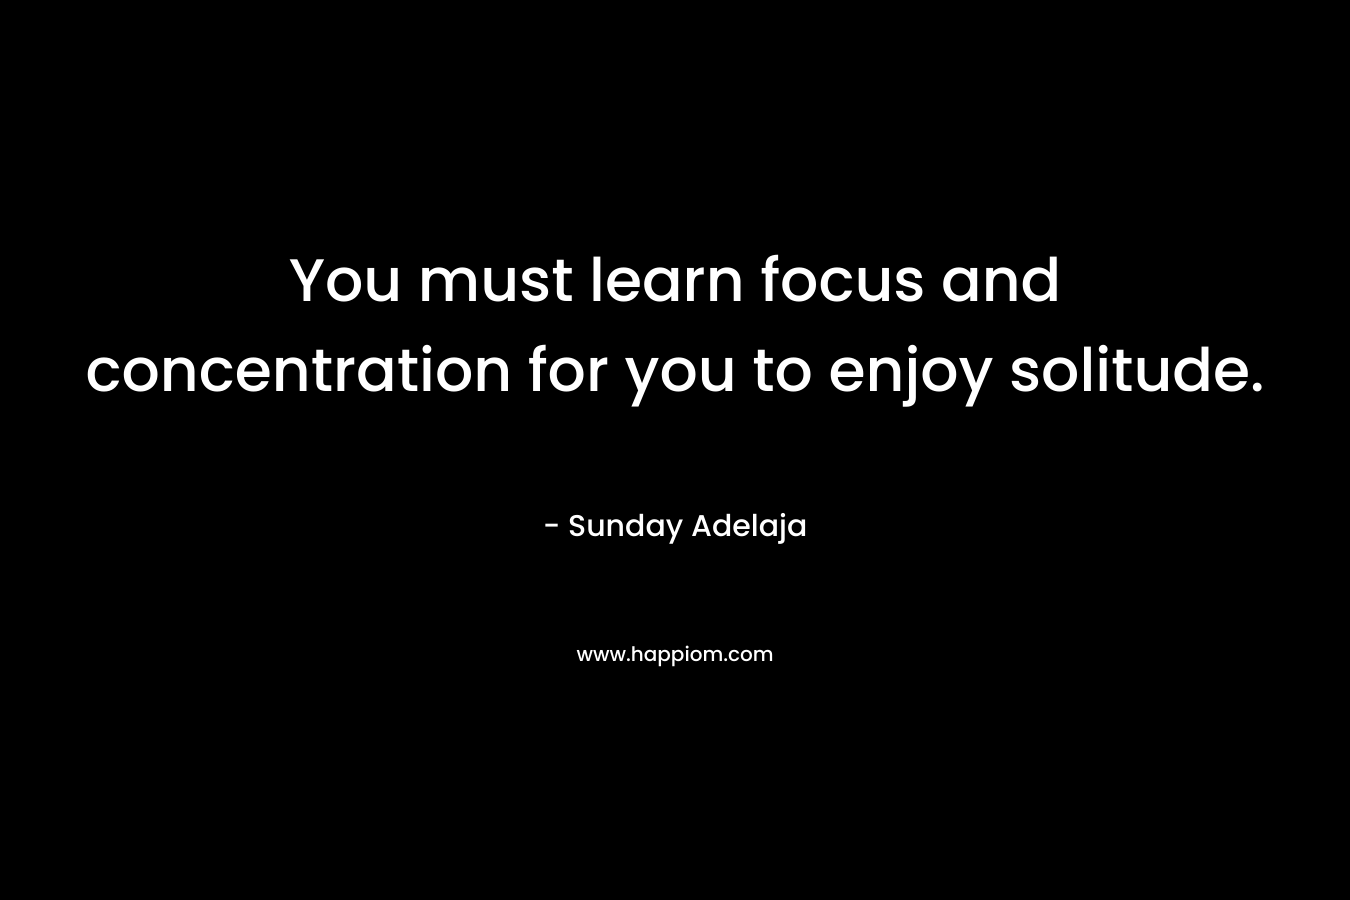 You must learn focus and concentration for you to enjoy solitude.